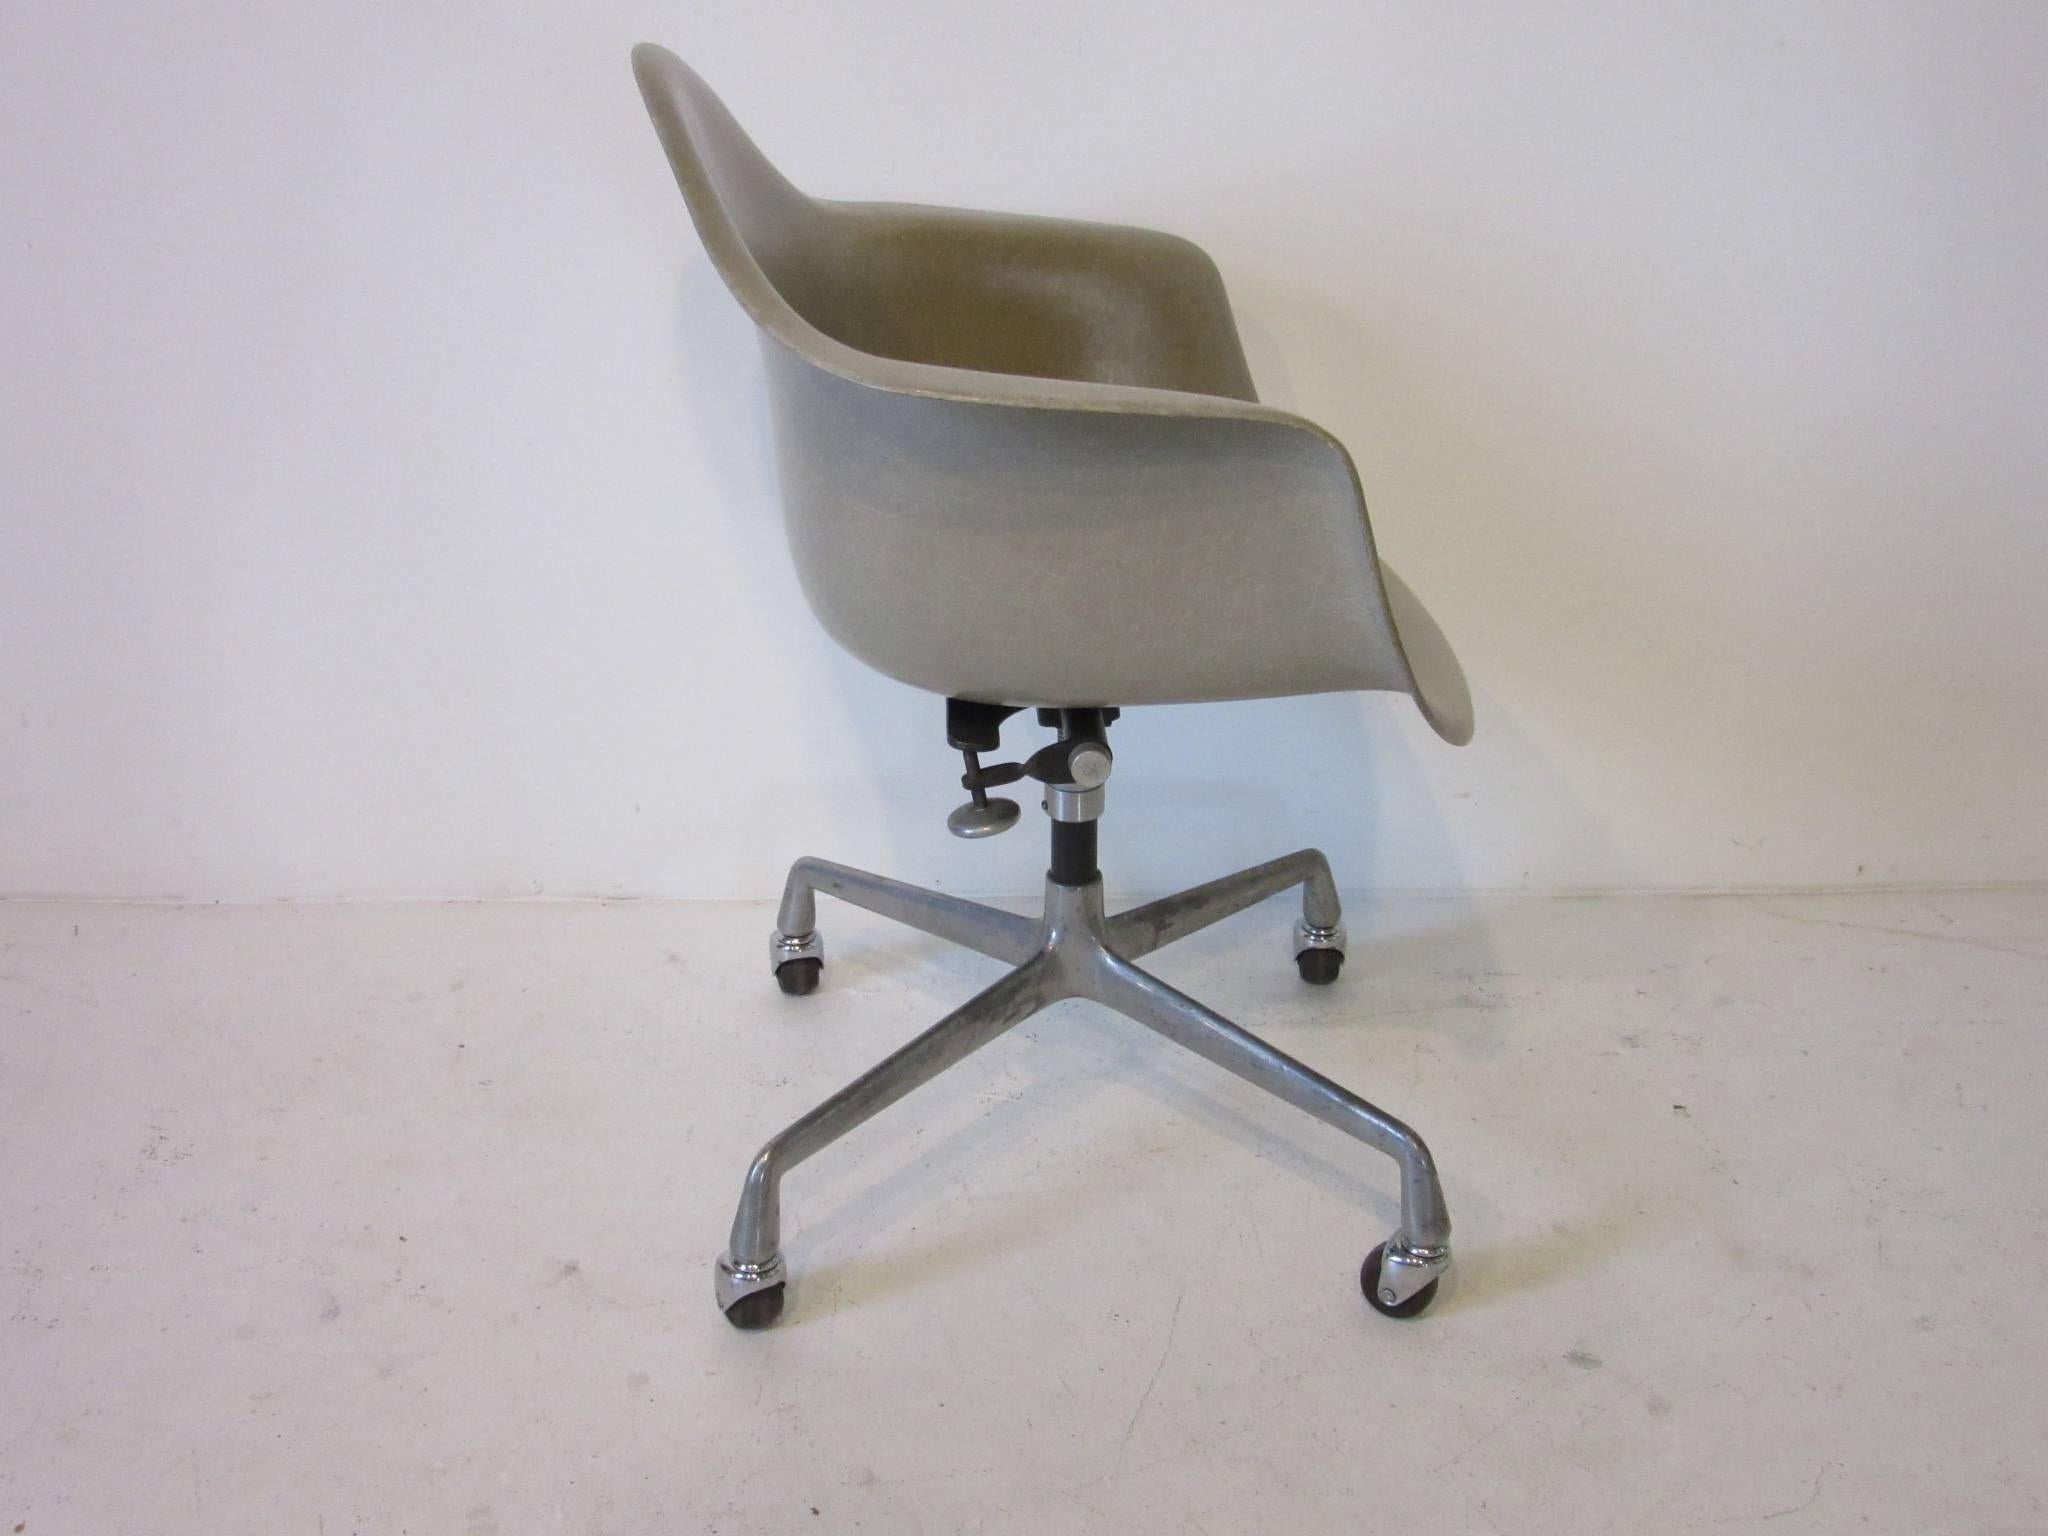 A taupe or greige toned fiberglass arm shell swivelling desk chair with cast aluminium rolling base manufactured by the Herman Miller Furniture Company.